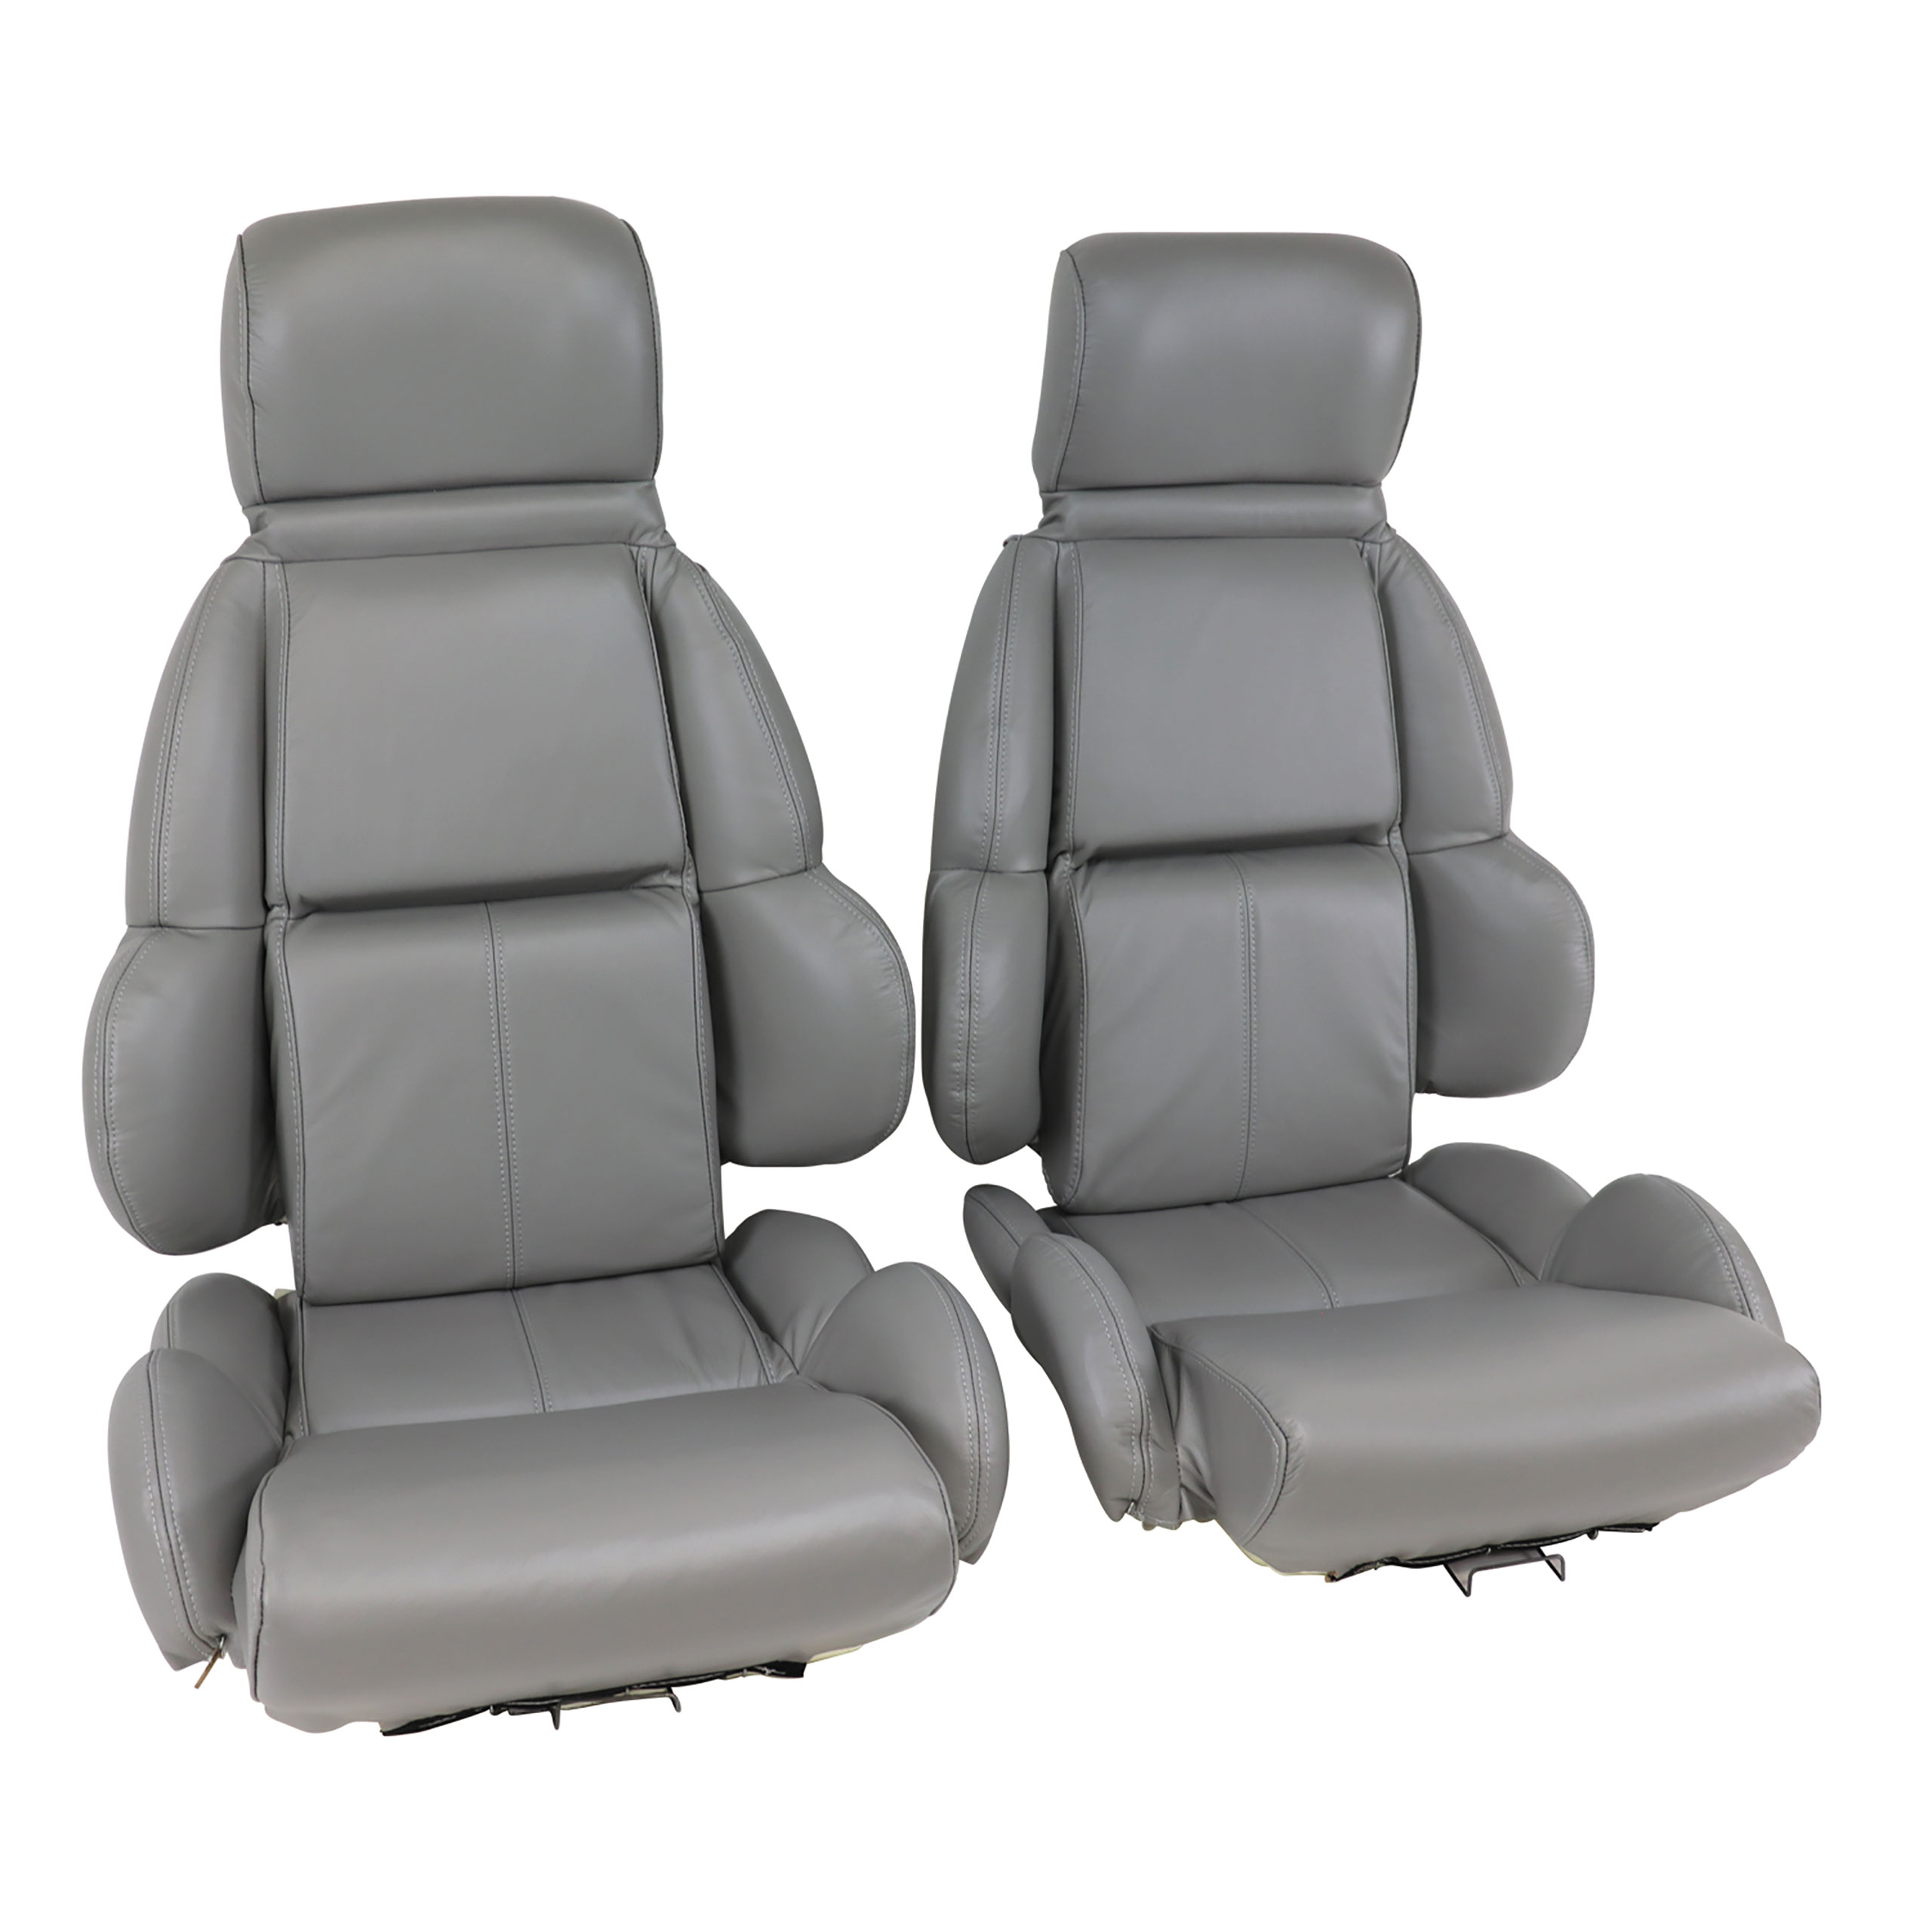 1992 C4 Corvette Mounted Leather Seat Covers Gray Standard